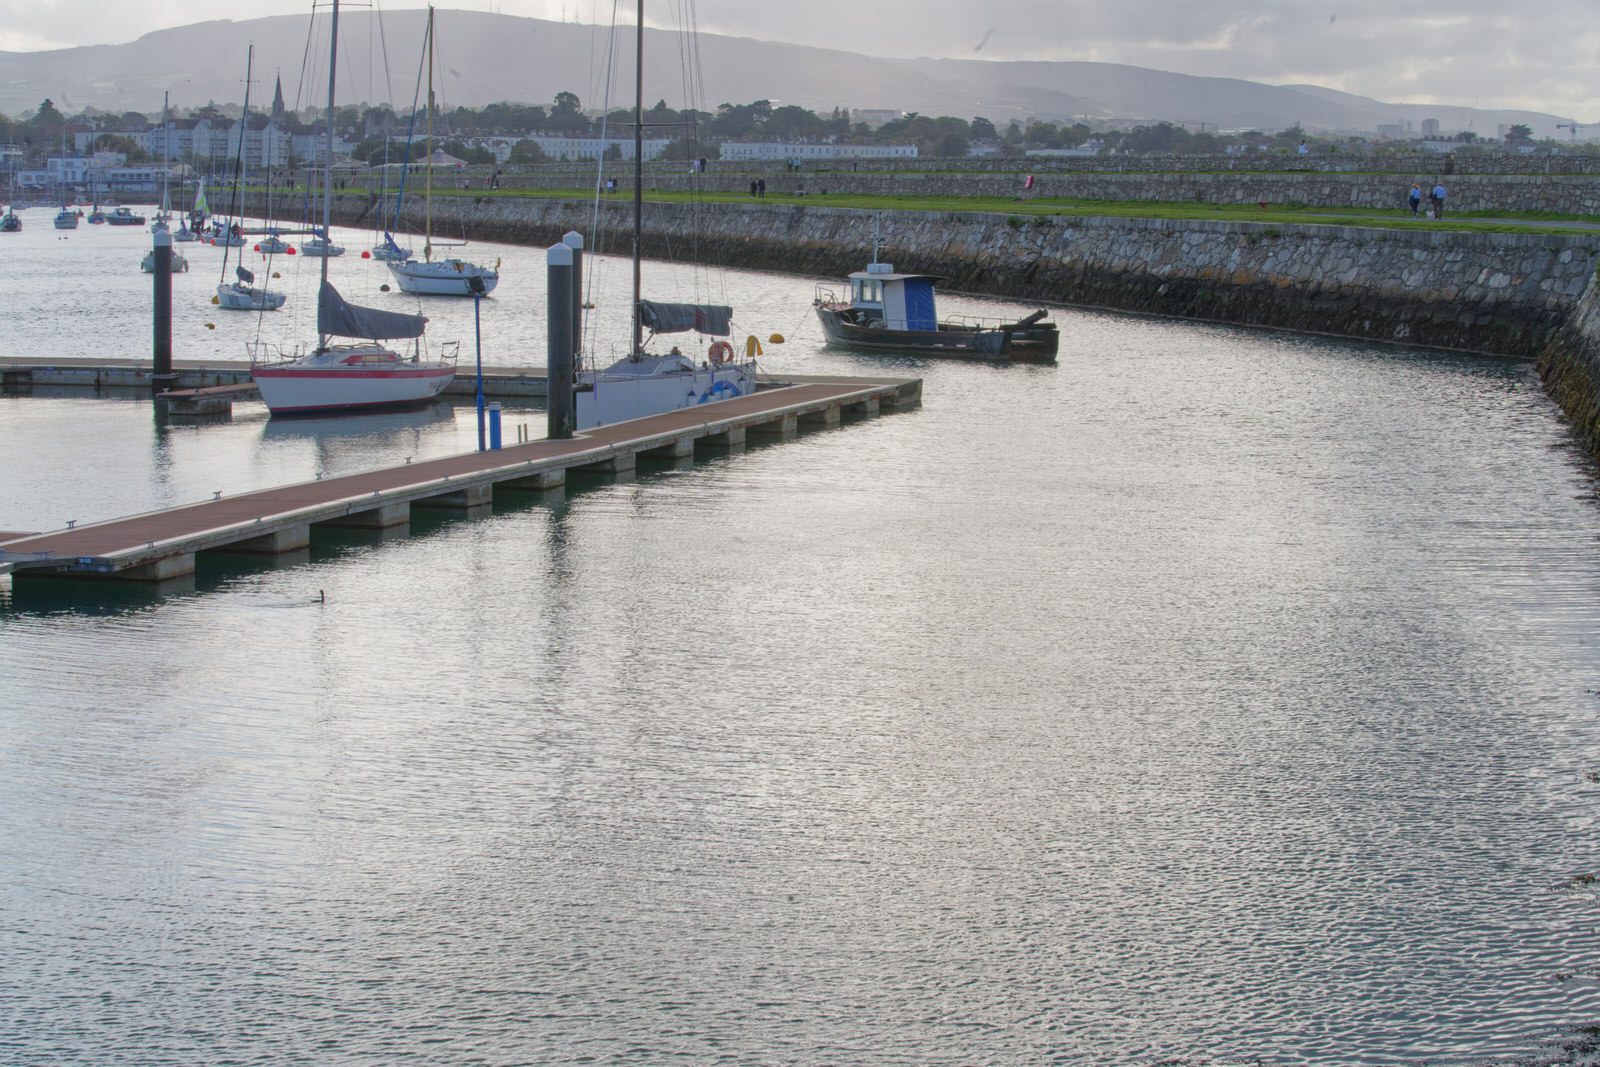 THE SECTION OF THE MARINA NEAR THE WESTERN BREAKWATER [DUN LAOGHAIRE HARBOUR] 003